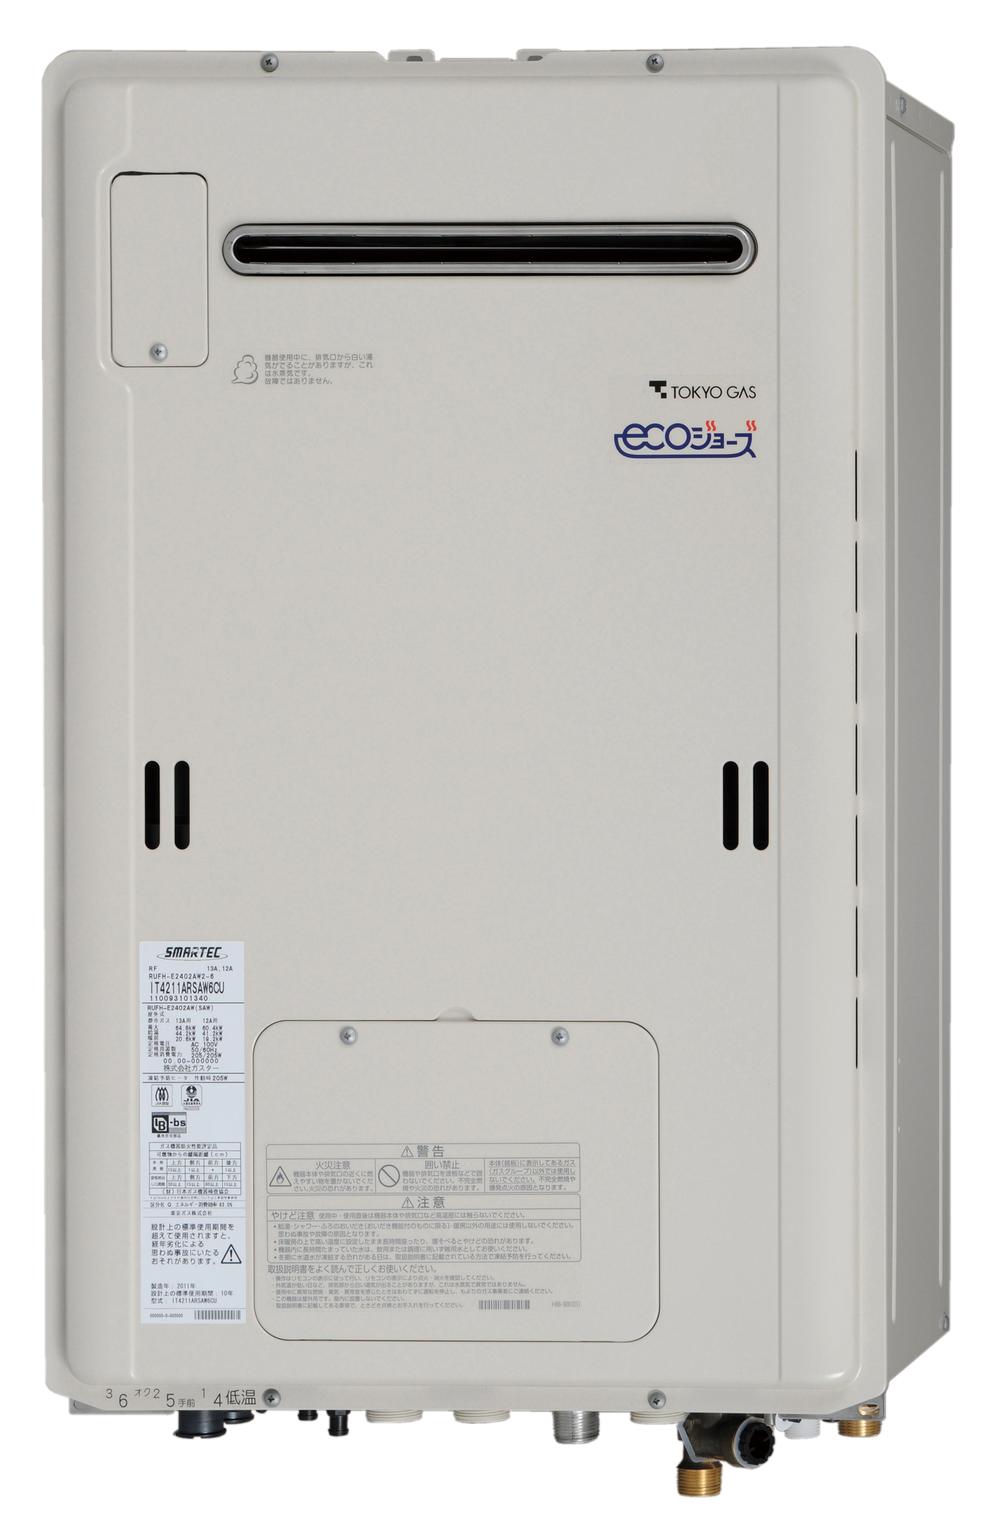 Power generation ・ Hot water equipment. Eco Jaws CO2 reduction, Water heater Earth-friendly.